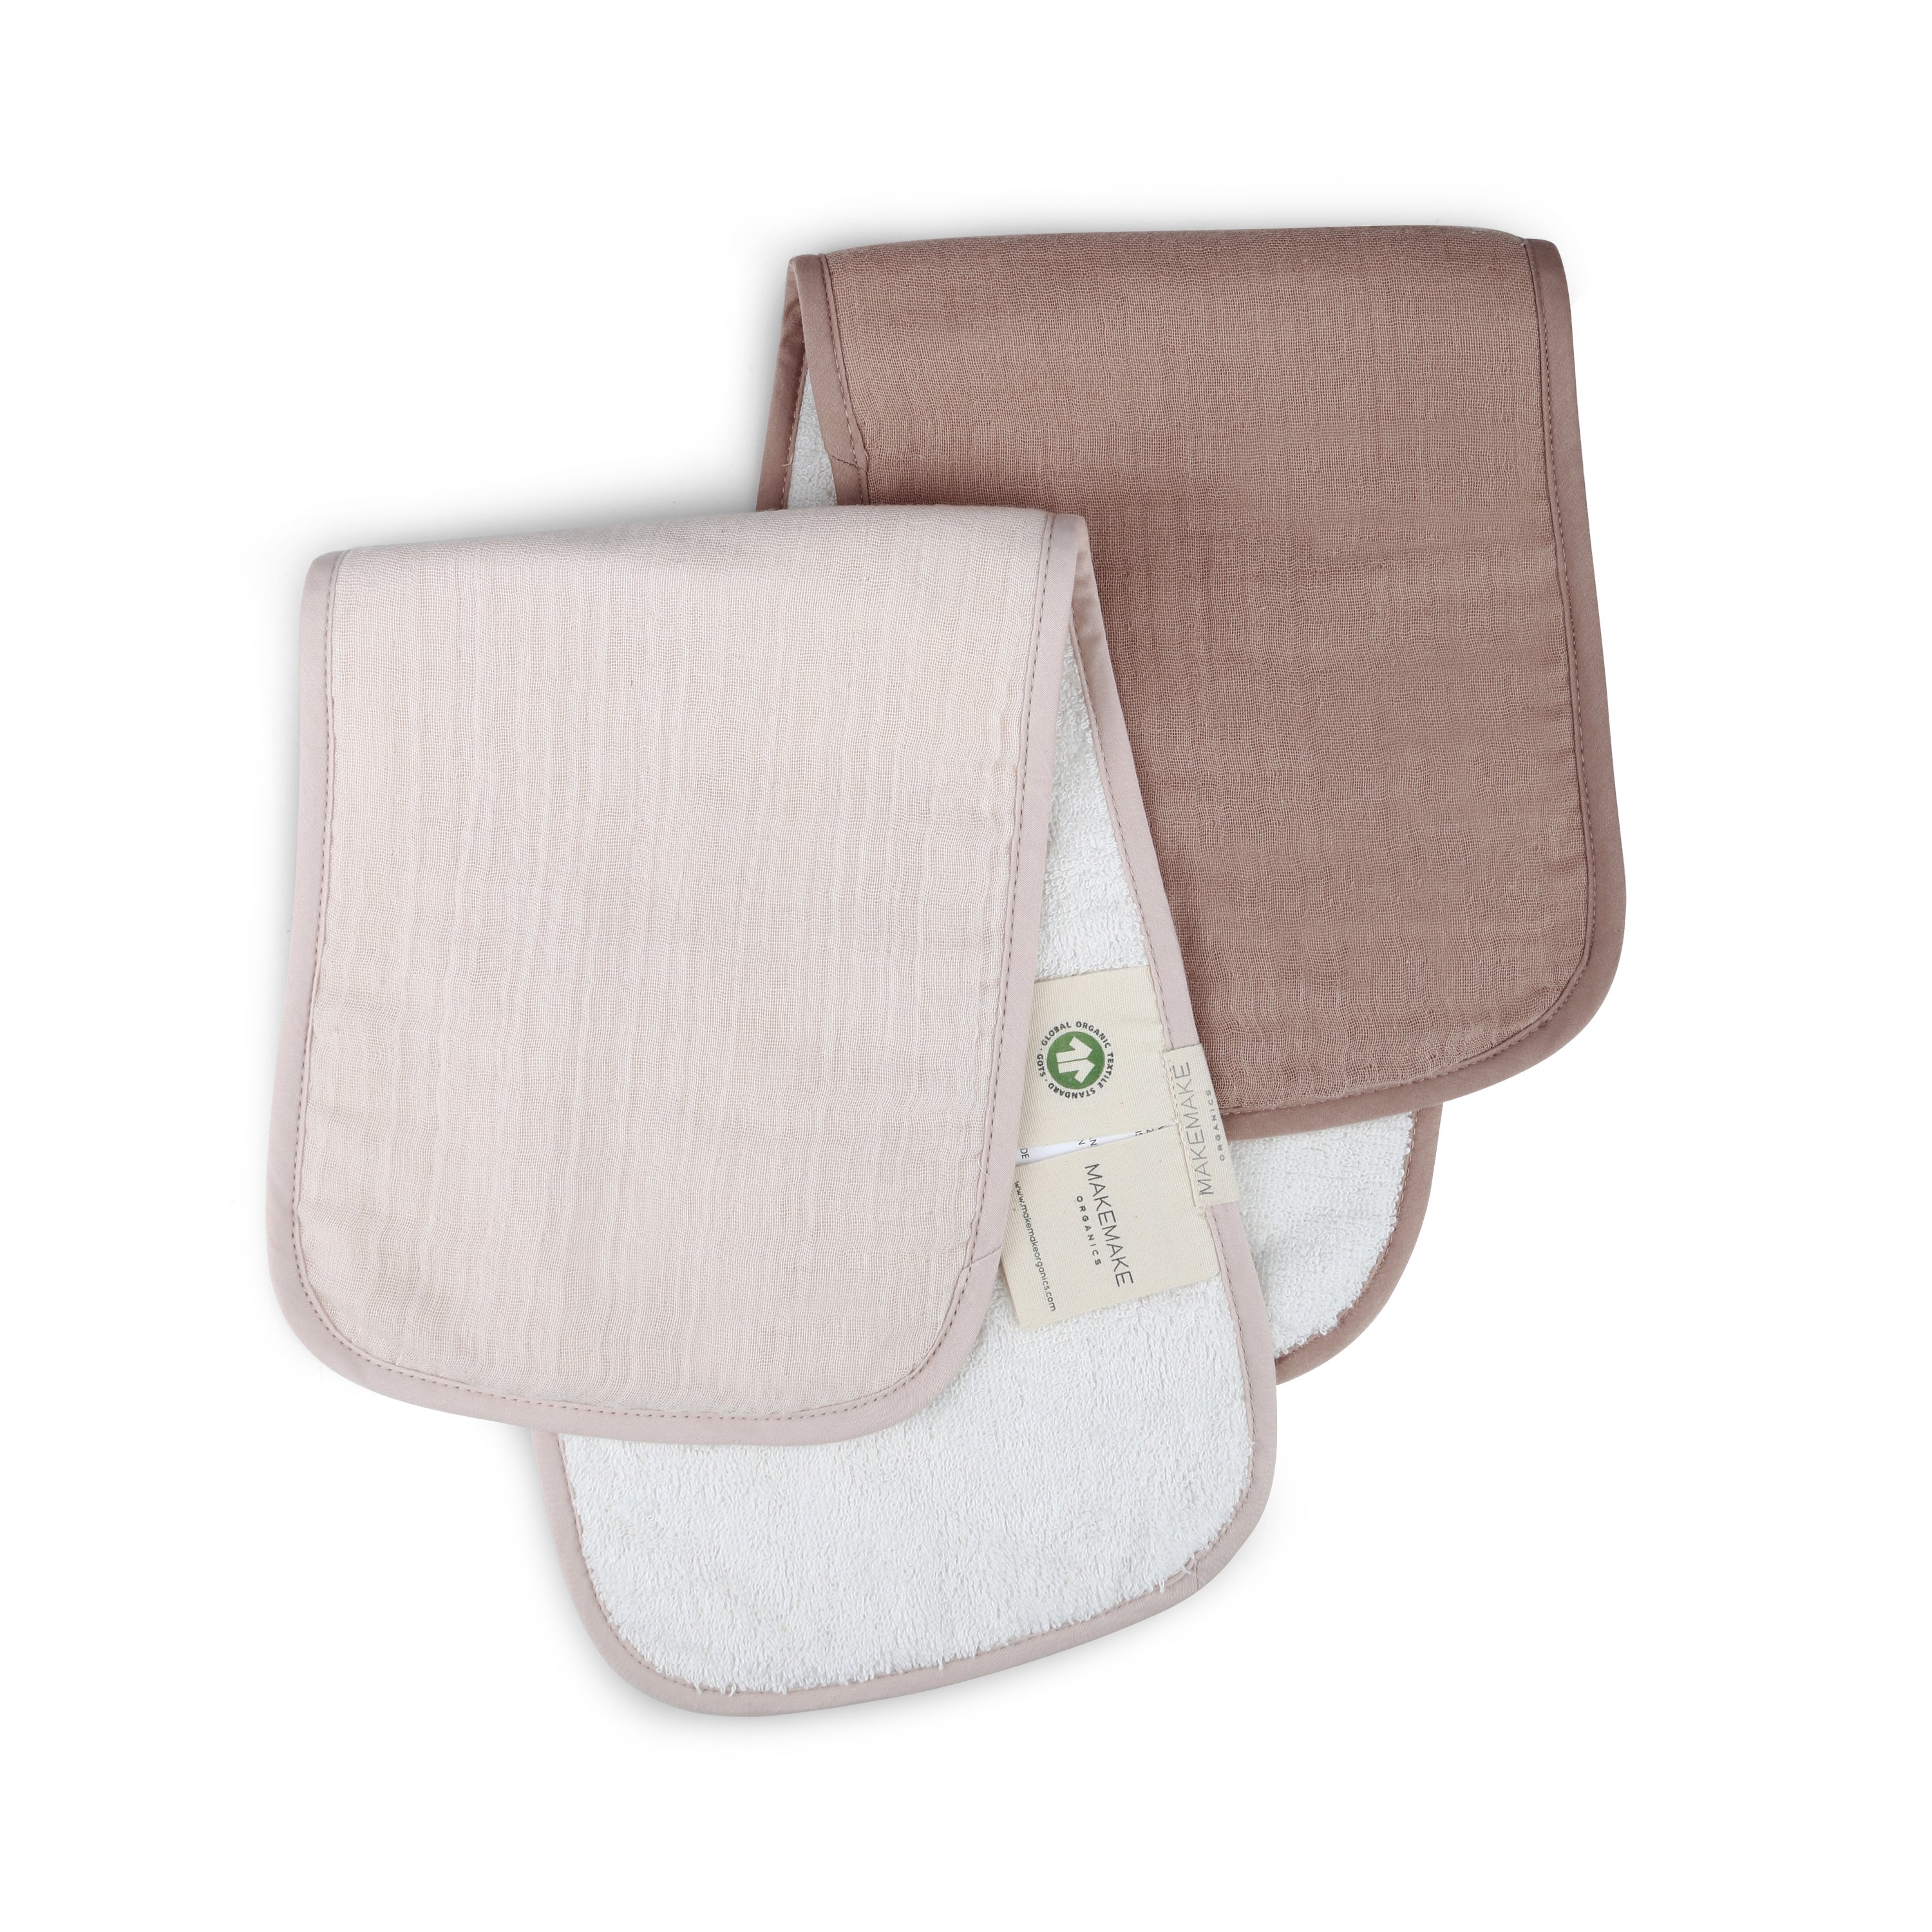 Two rectangular, Makemake Organics Organic Cotton Muslin Burp Cloths in Blush Oat & Pecan, arranged overlapping on a white background. One cloth has a visible label showing it's organic.